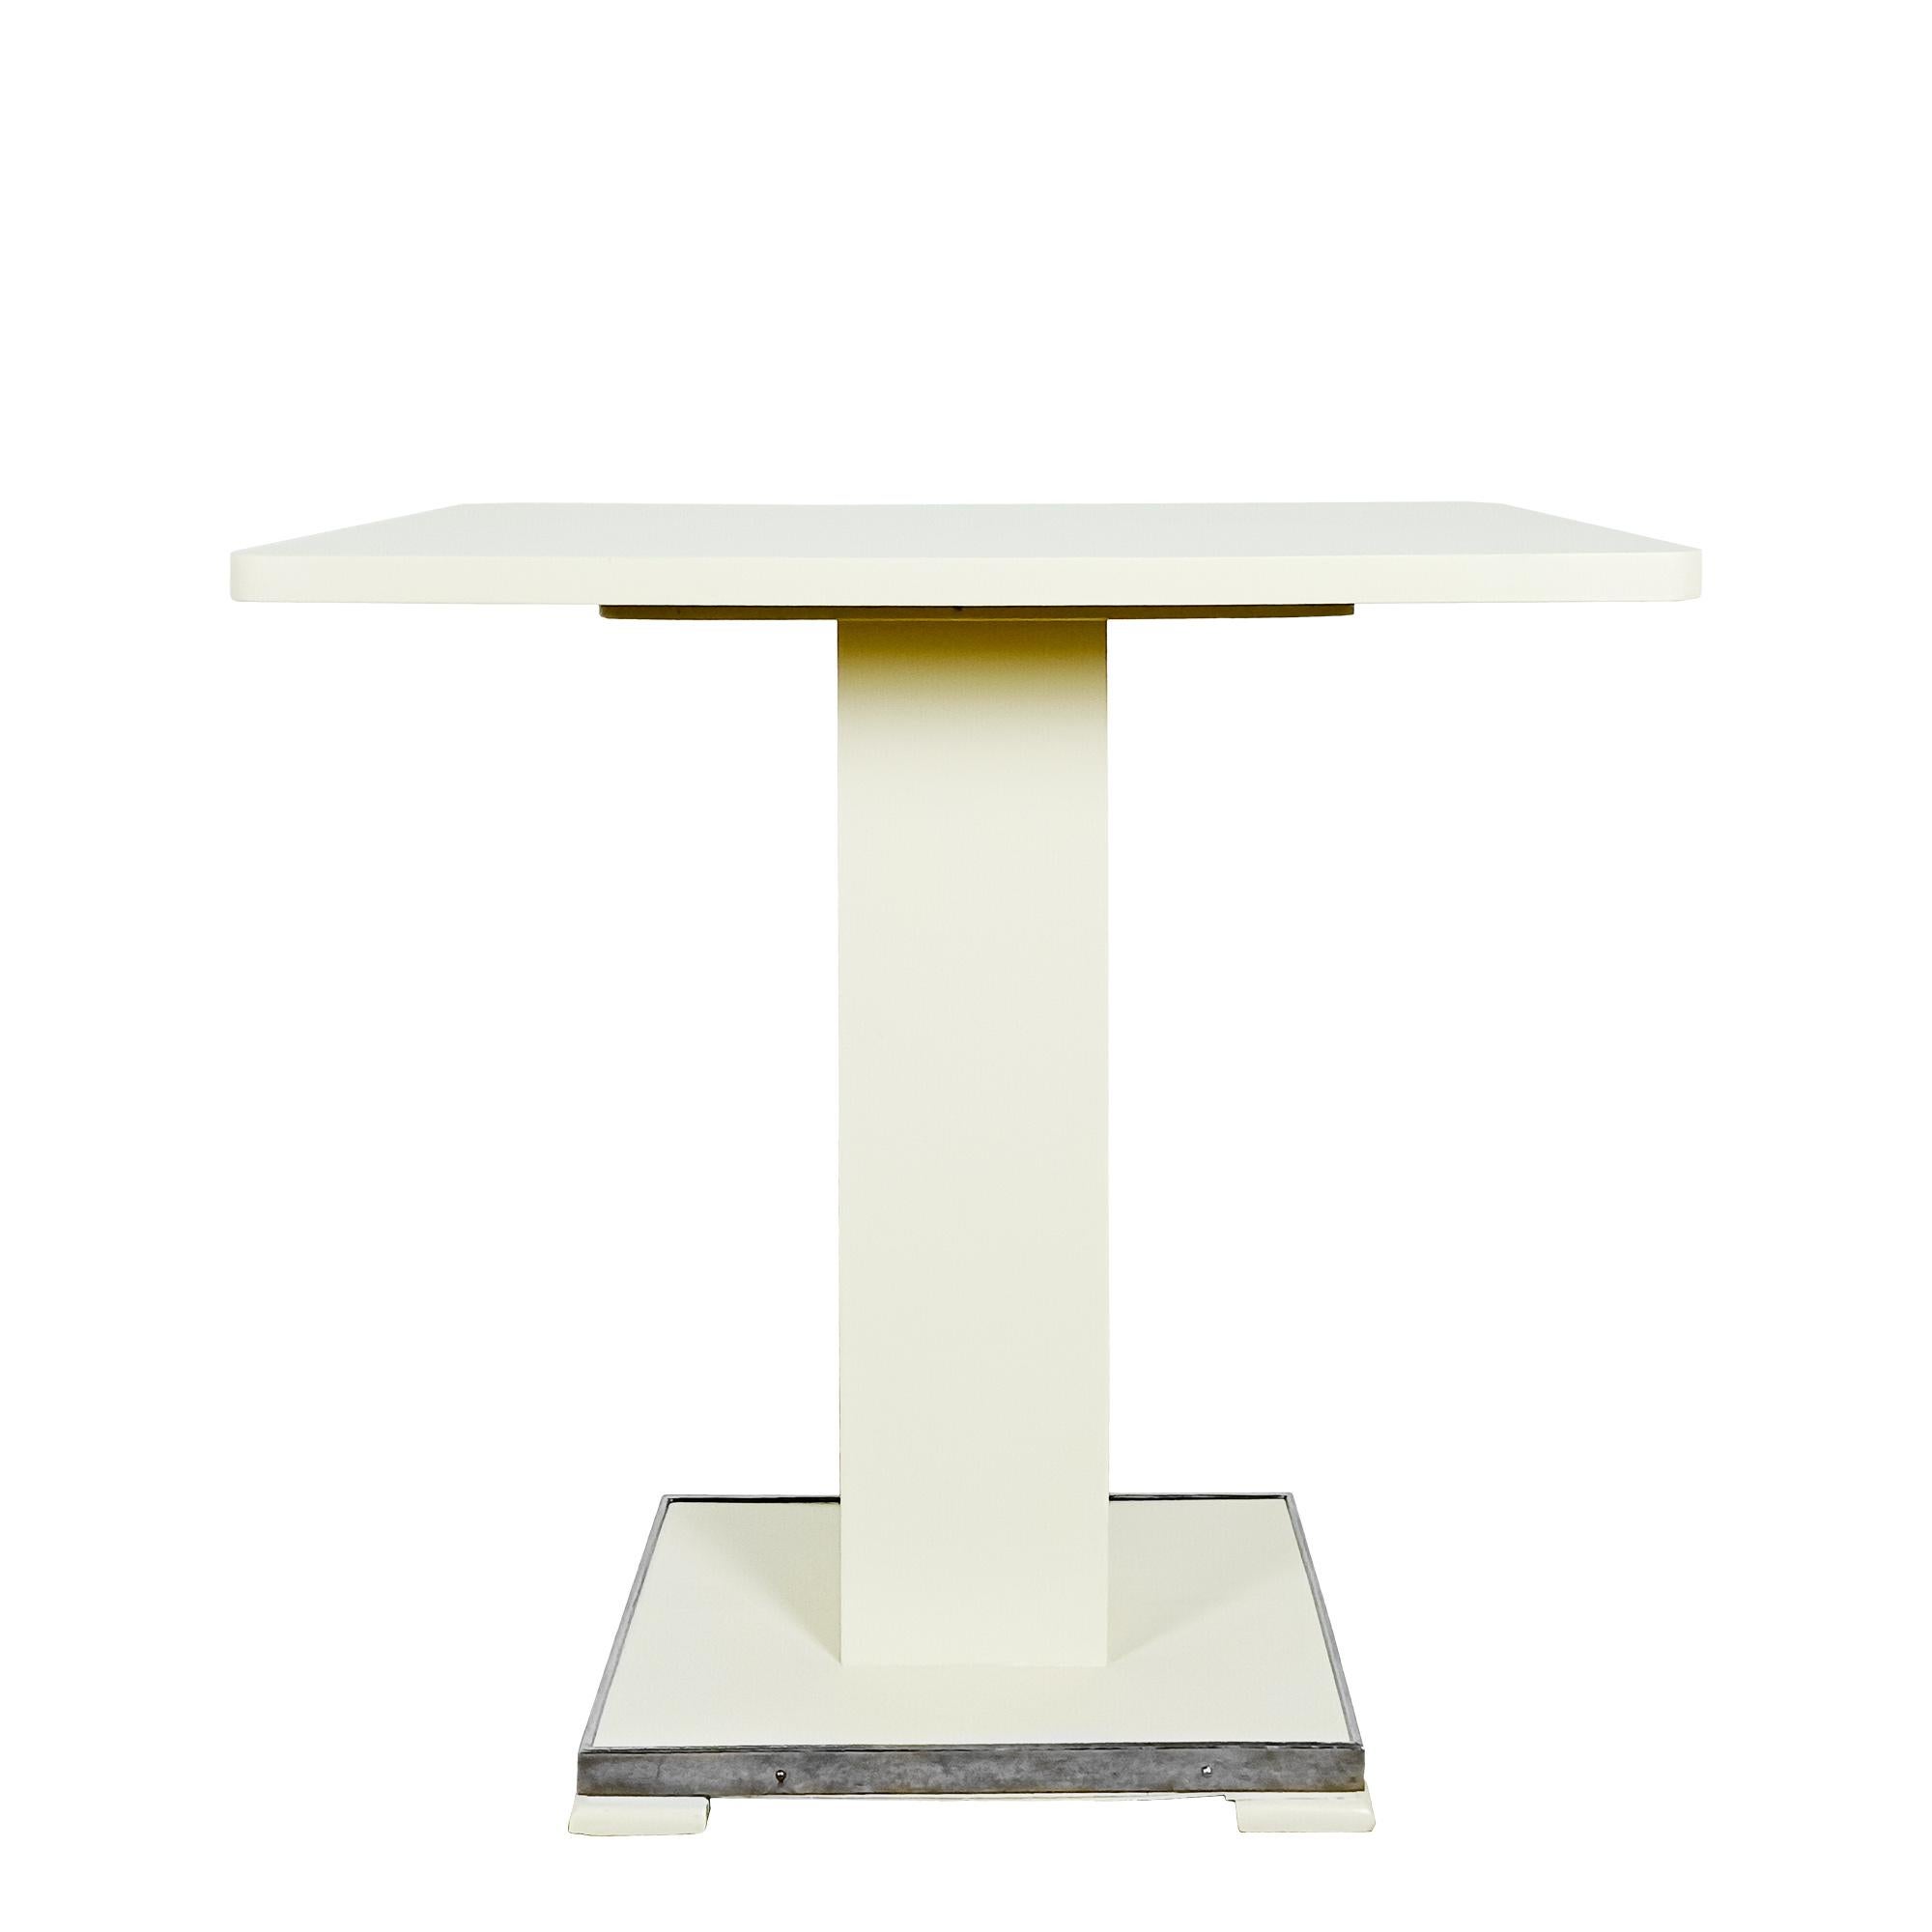 Art Deco table and two chairs with an ivory satin lacquered finish, Art Deco period fabric, designed and produced by De Coene Frères.
Courtrai, Belgium circa 1935

Dimensions
1 – Table
cm 70 x 50 x 71
inches 27.56 x 19.68 x 27.95

2 – Chair
cm 43 x